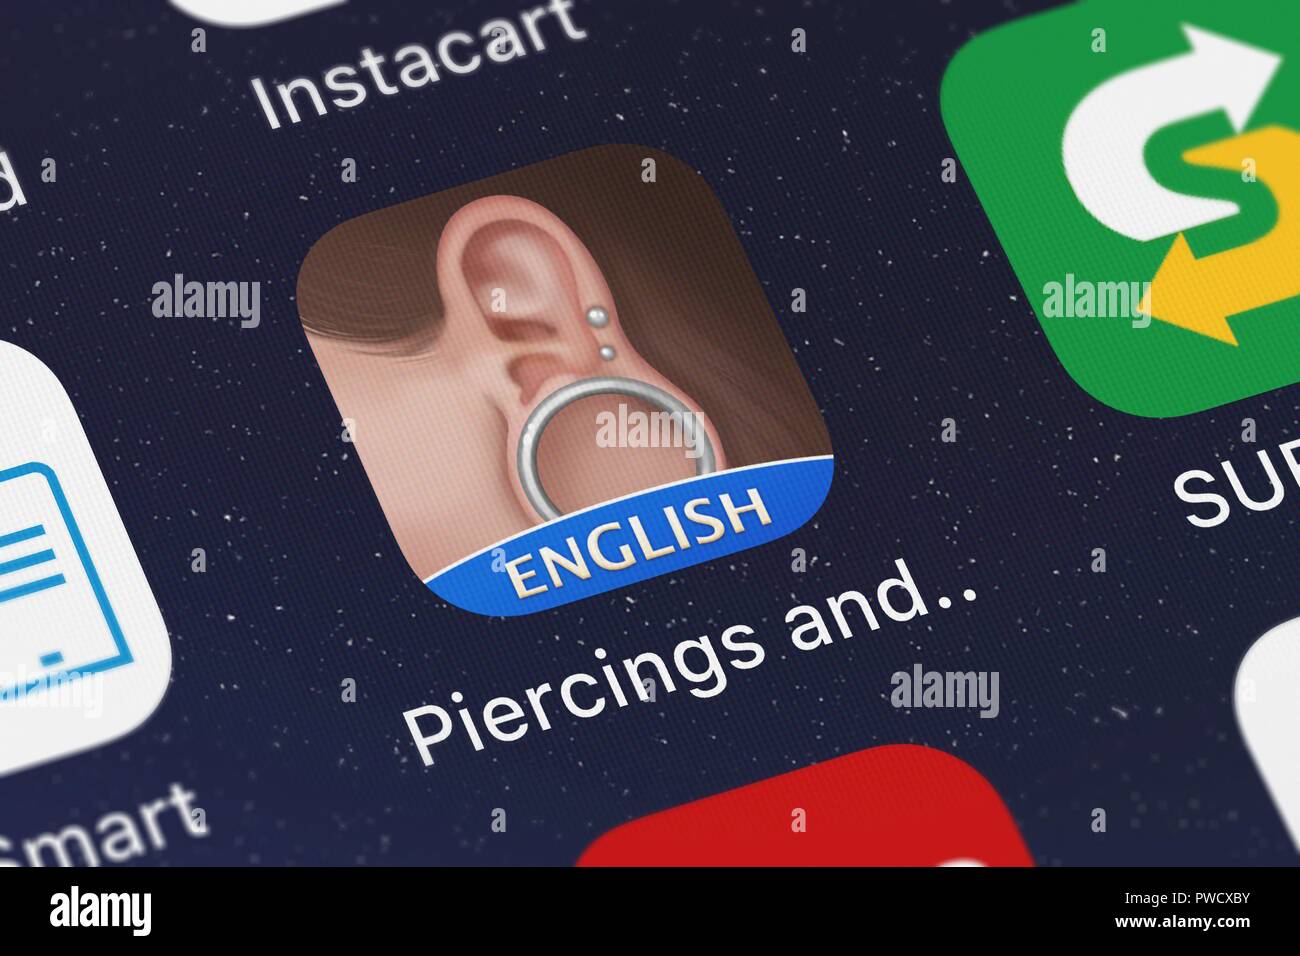 London, United Kingdom - October 15, 2018: Screenshot of the Piercings and Body Mod Amino mobile app from Narvii Inc. icon on an iPhone. Stock Photo